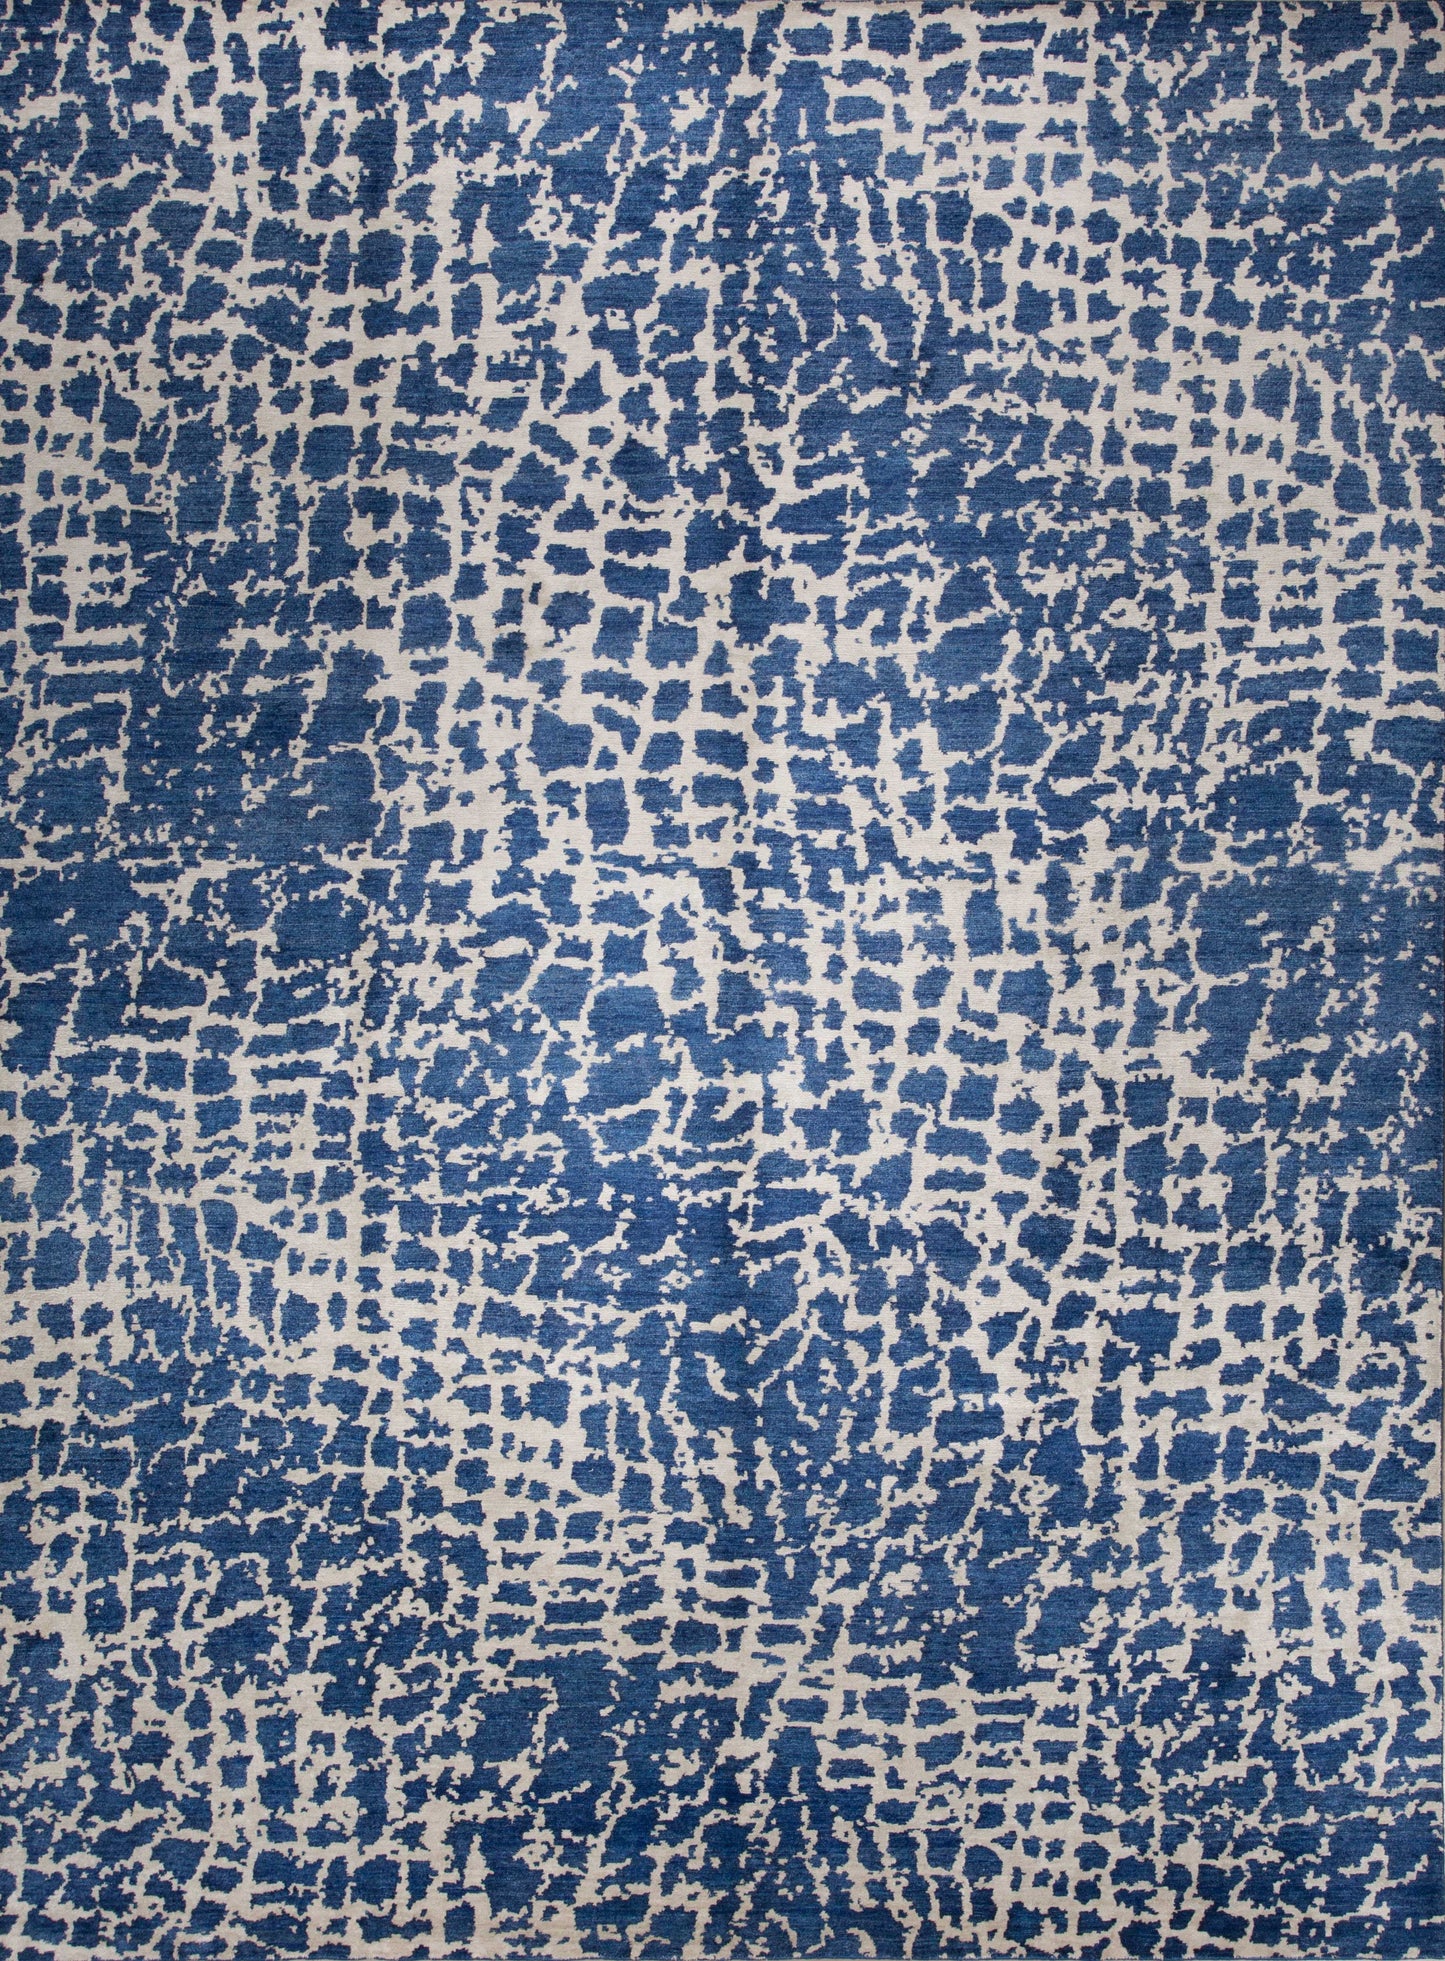 Animal print rug knotted with blue and silver.